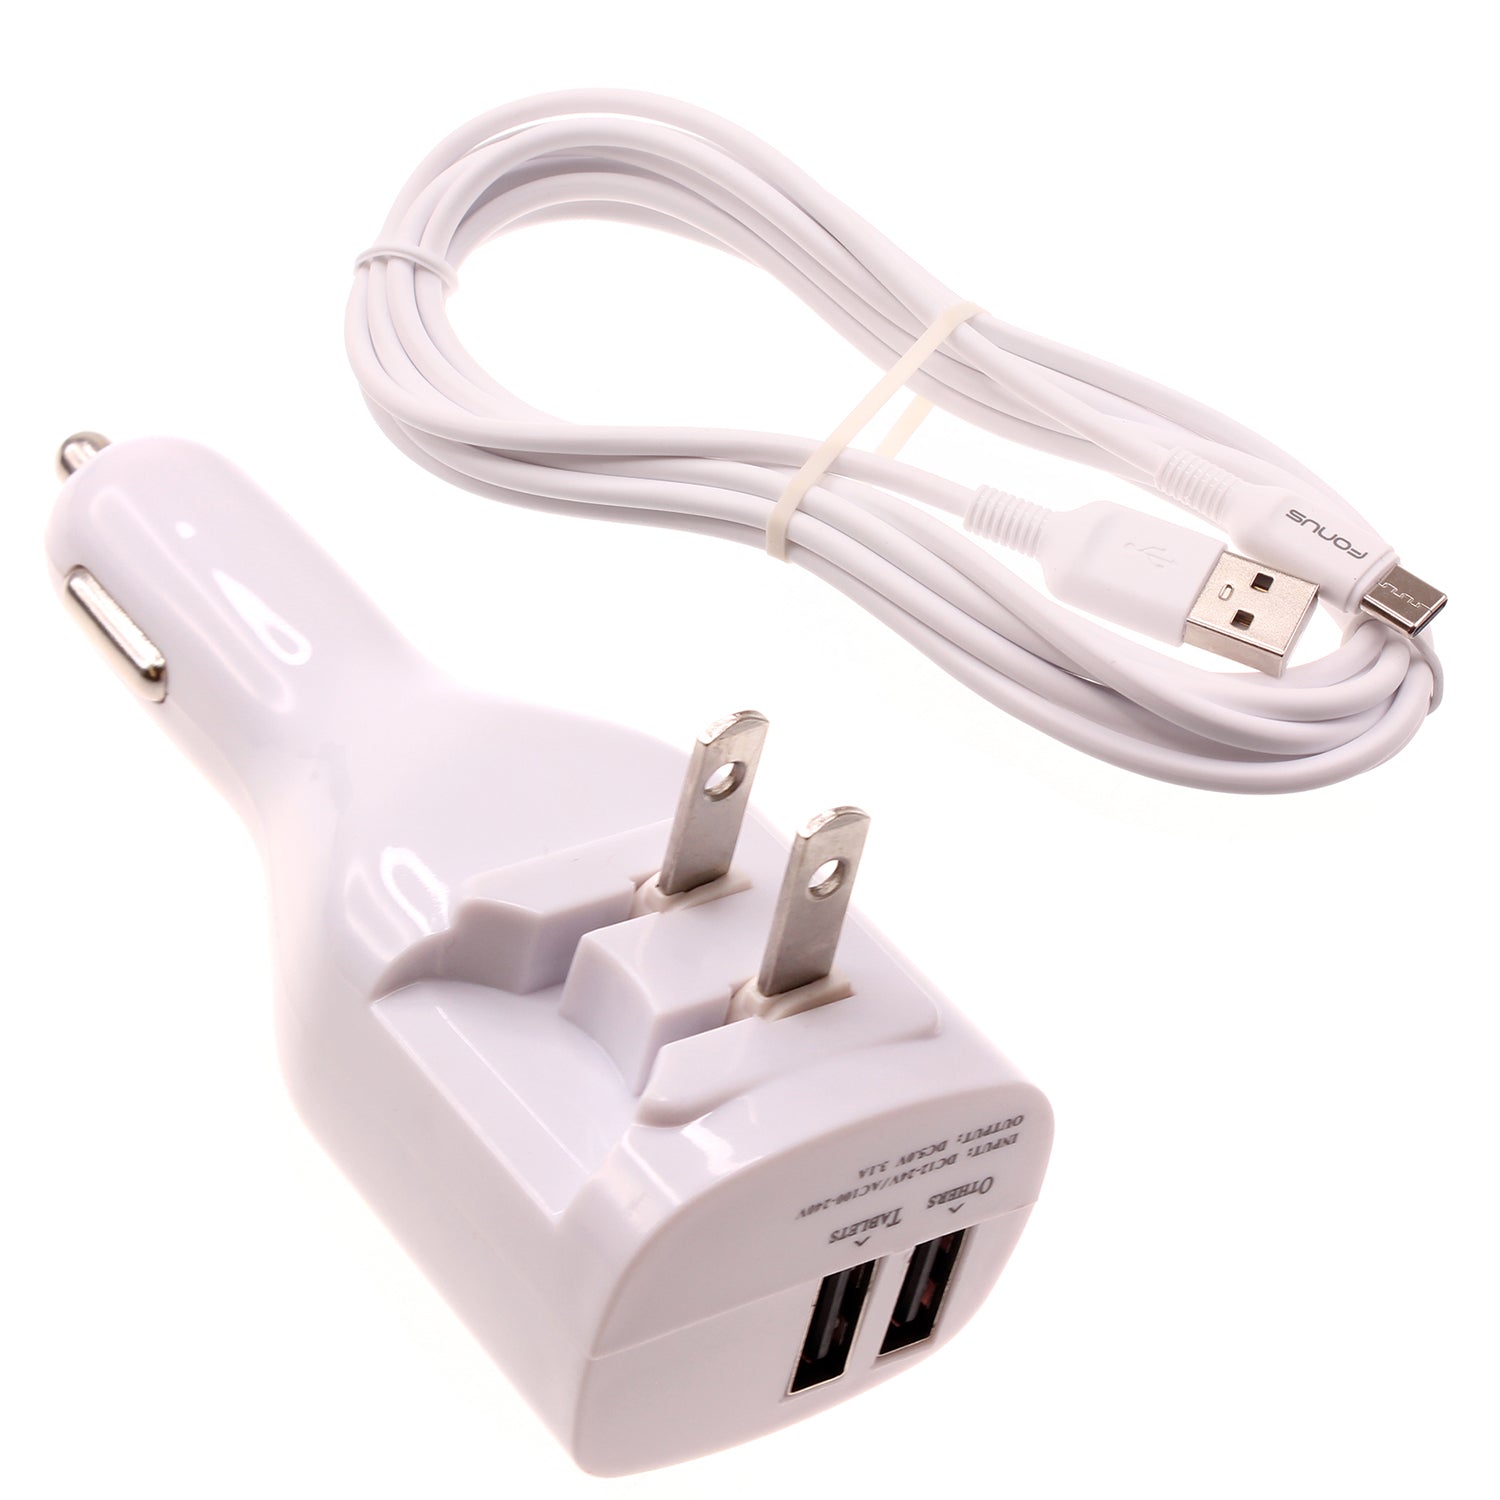 2-in-1 Car Home Charger, Travel Power Adapter Long Cord 6ft Micro USB Cable - ACY14